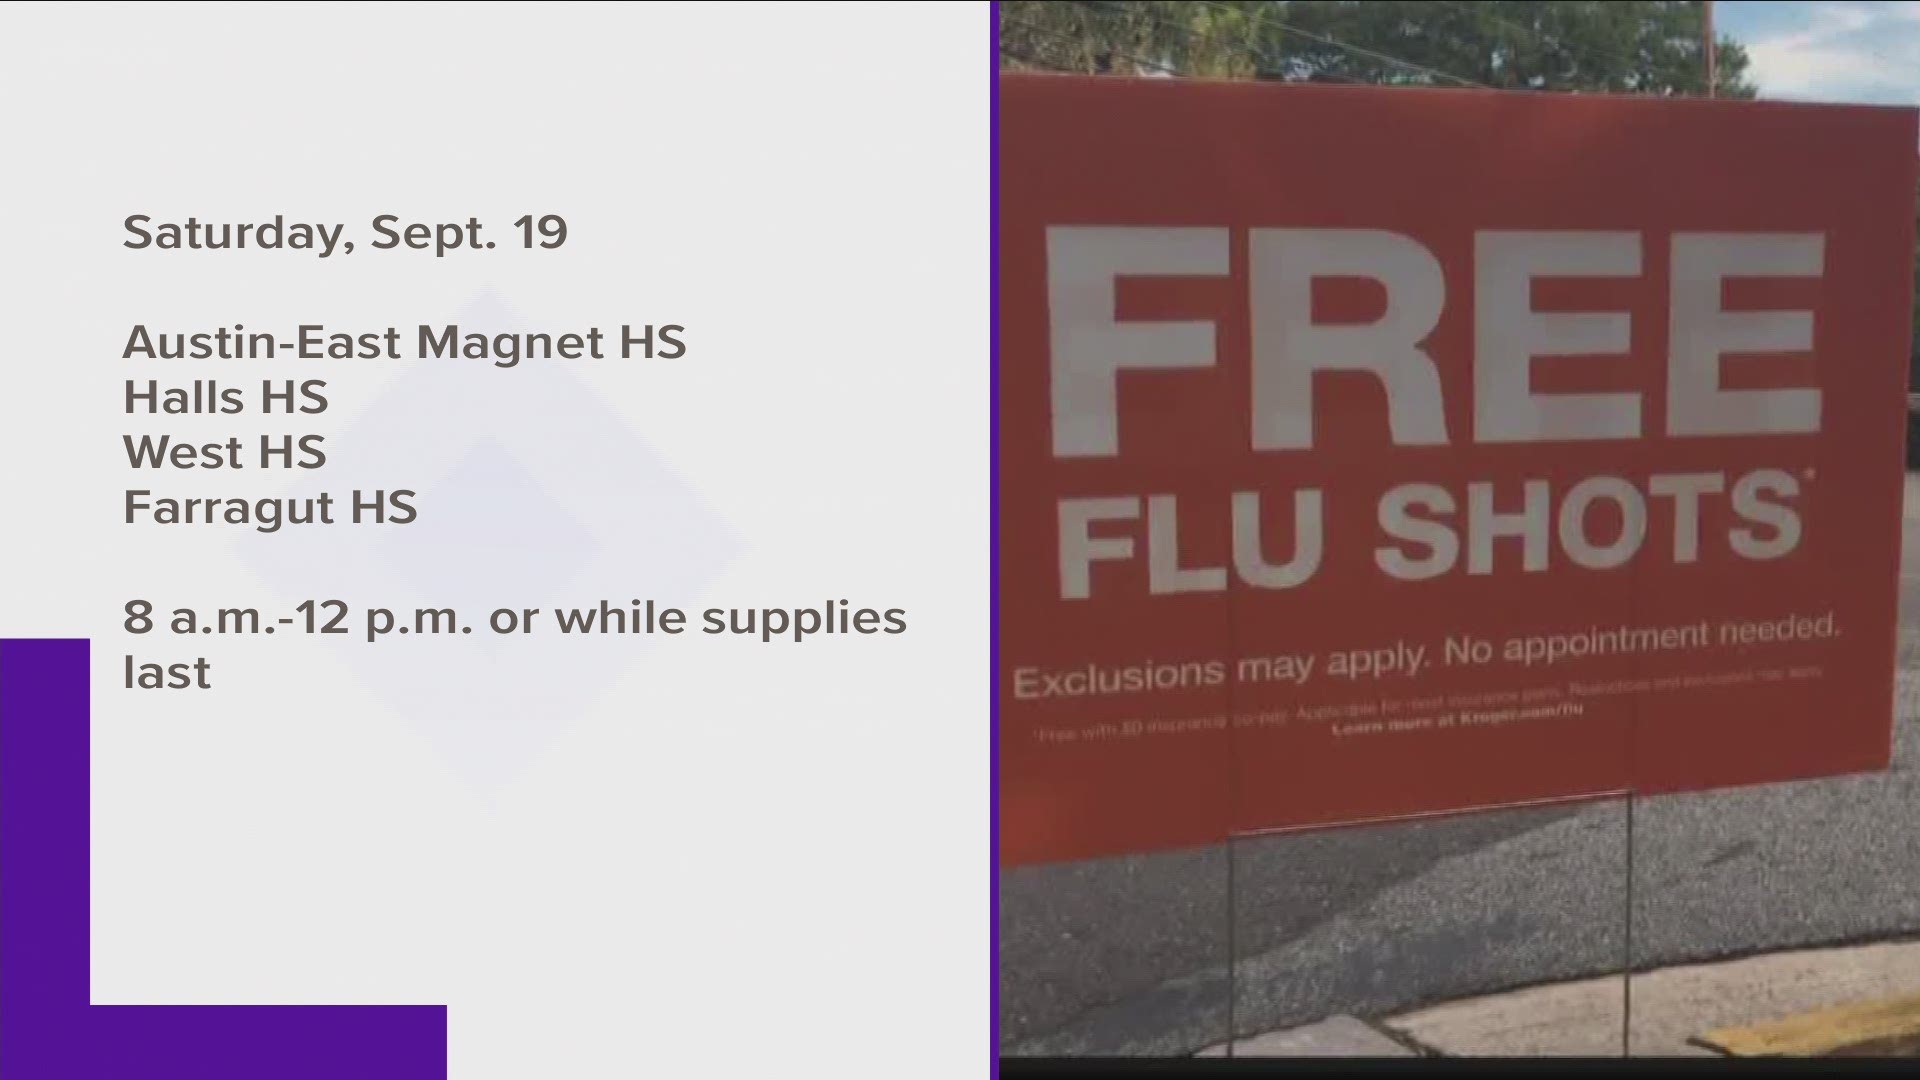 There will be free flu shots at a variety of schools across the county from 8 a.m. to 12 p.m. on Saturday.